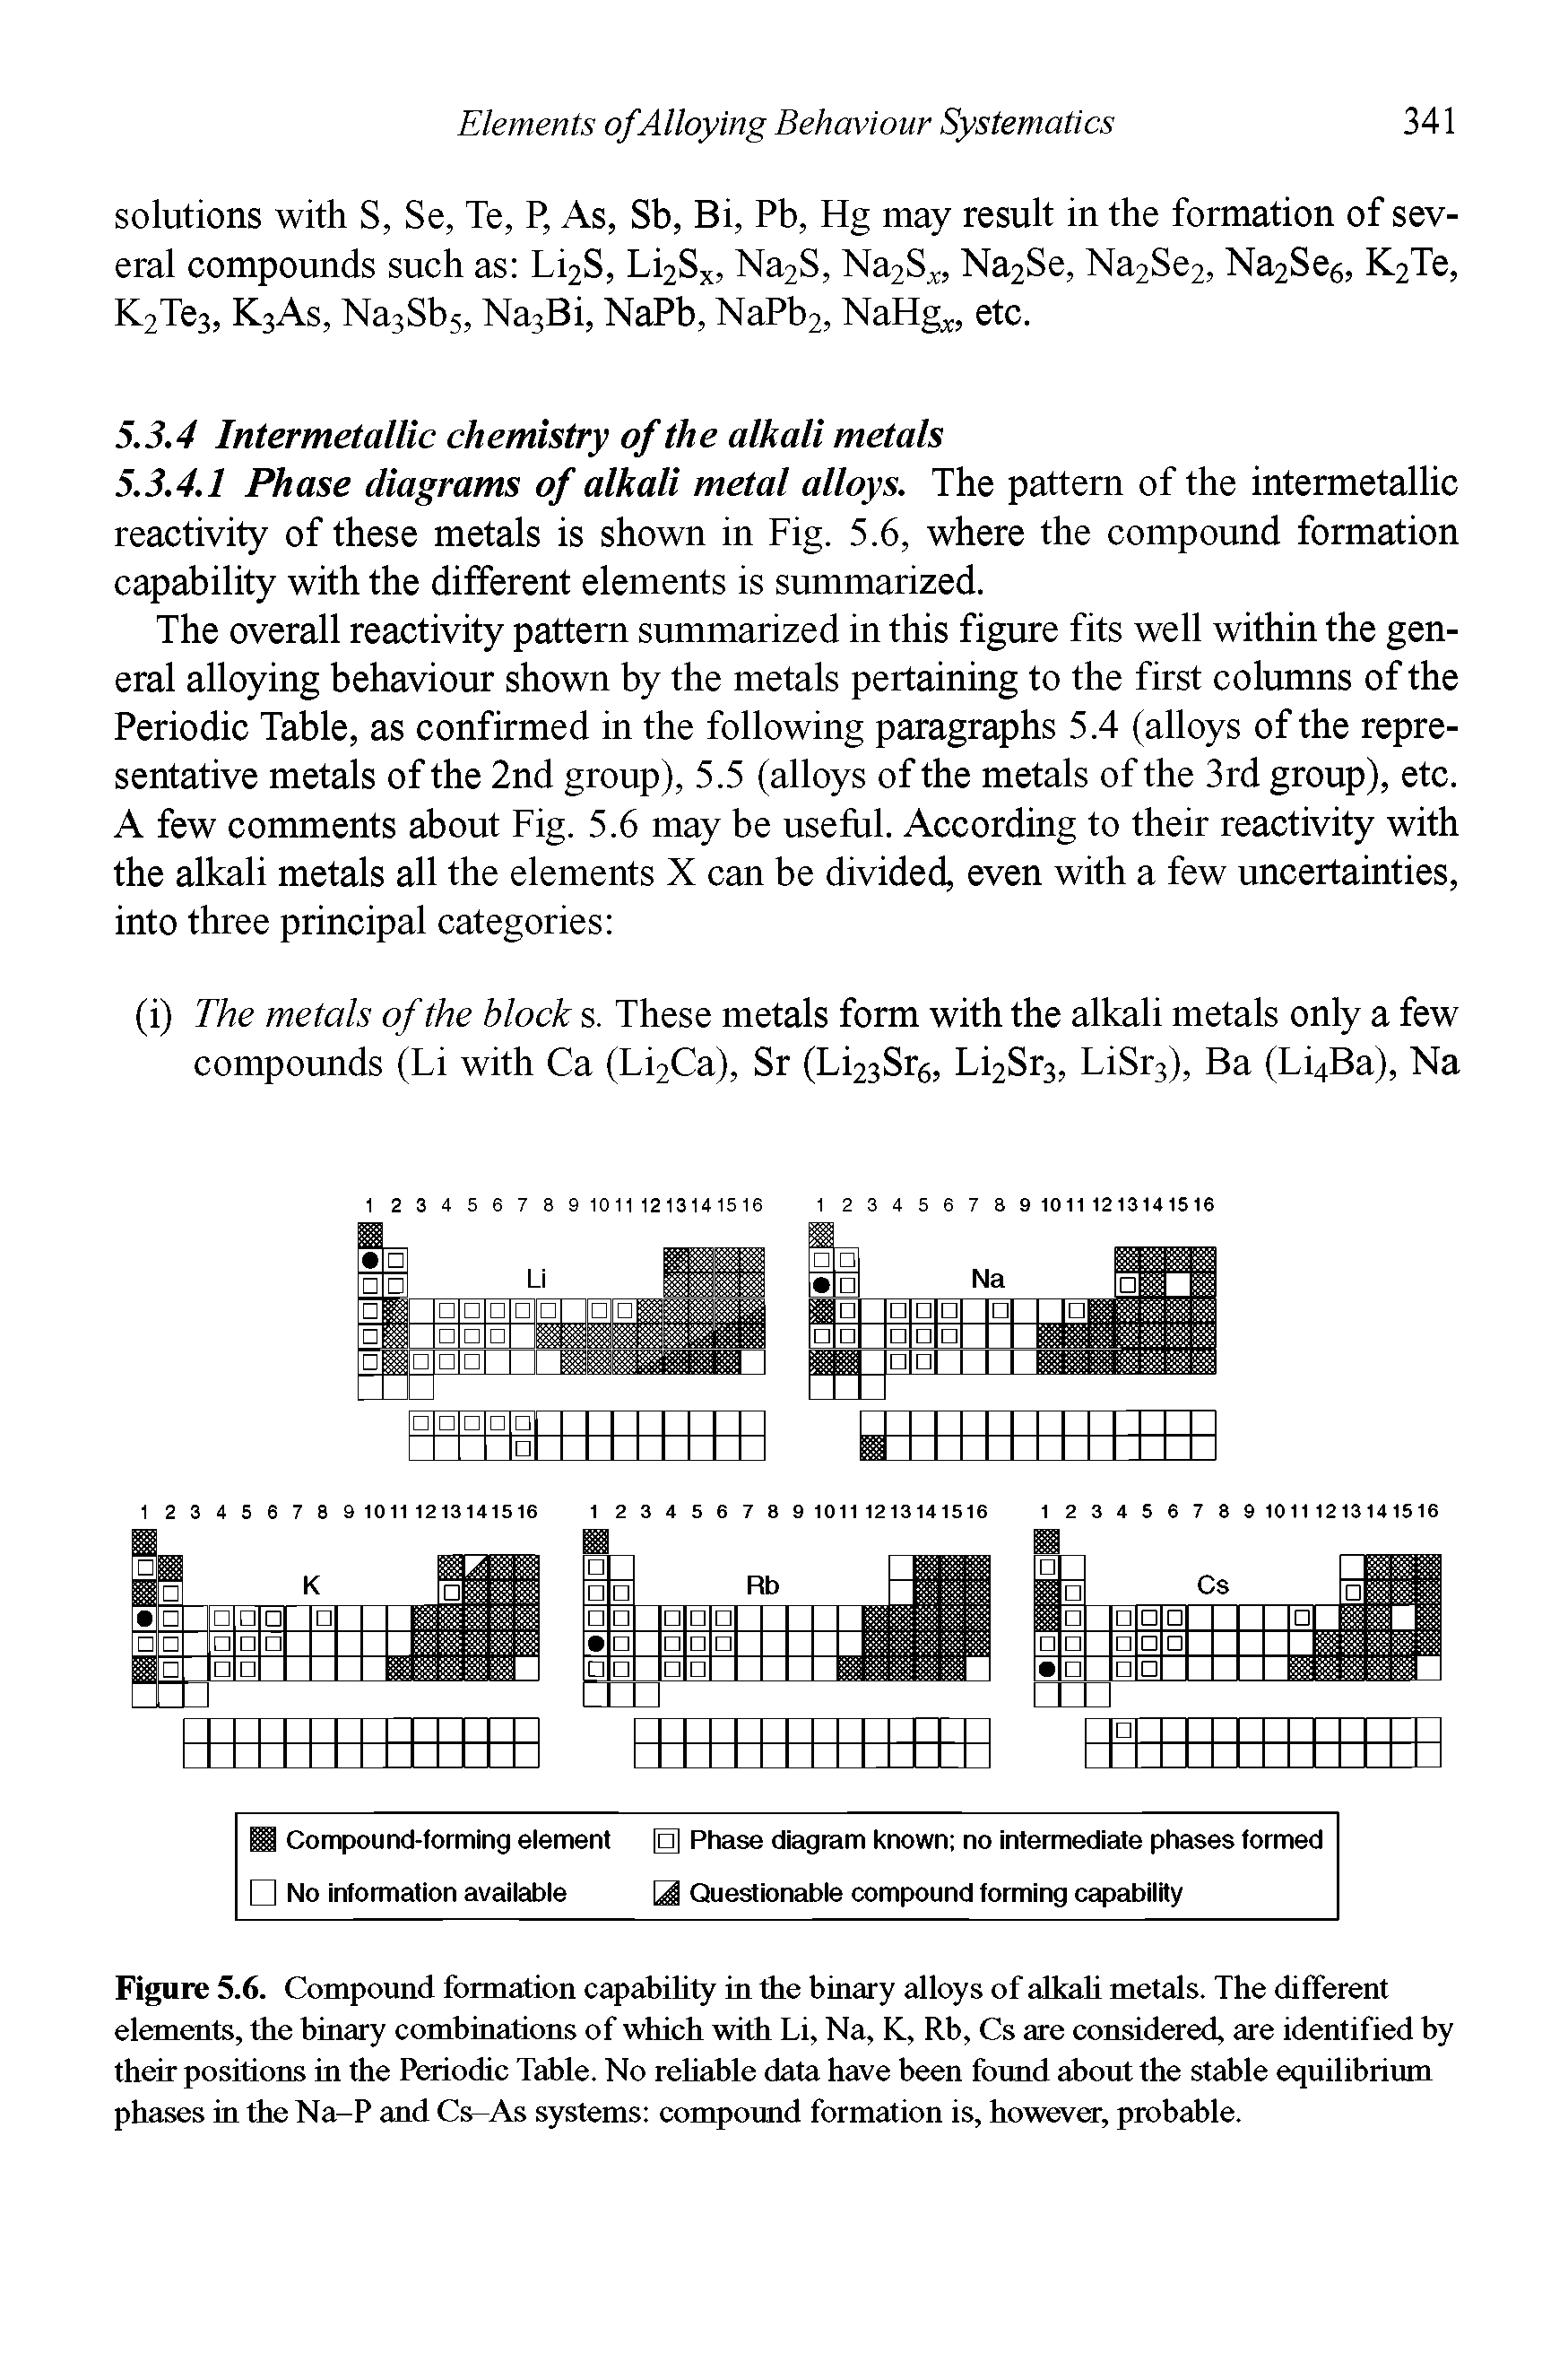 Figure 5.6. Compound formation capability in the binary alloys of alkali metals. The different elements, the binary combinations of which with Li, Na, K, Rb, Cs are considered, are identified by their positions in the Periodic Table. No rehable data have been found about the stable equilibrium phases in the Na-P and Cs-As systems compound formation is, however, probable.